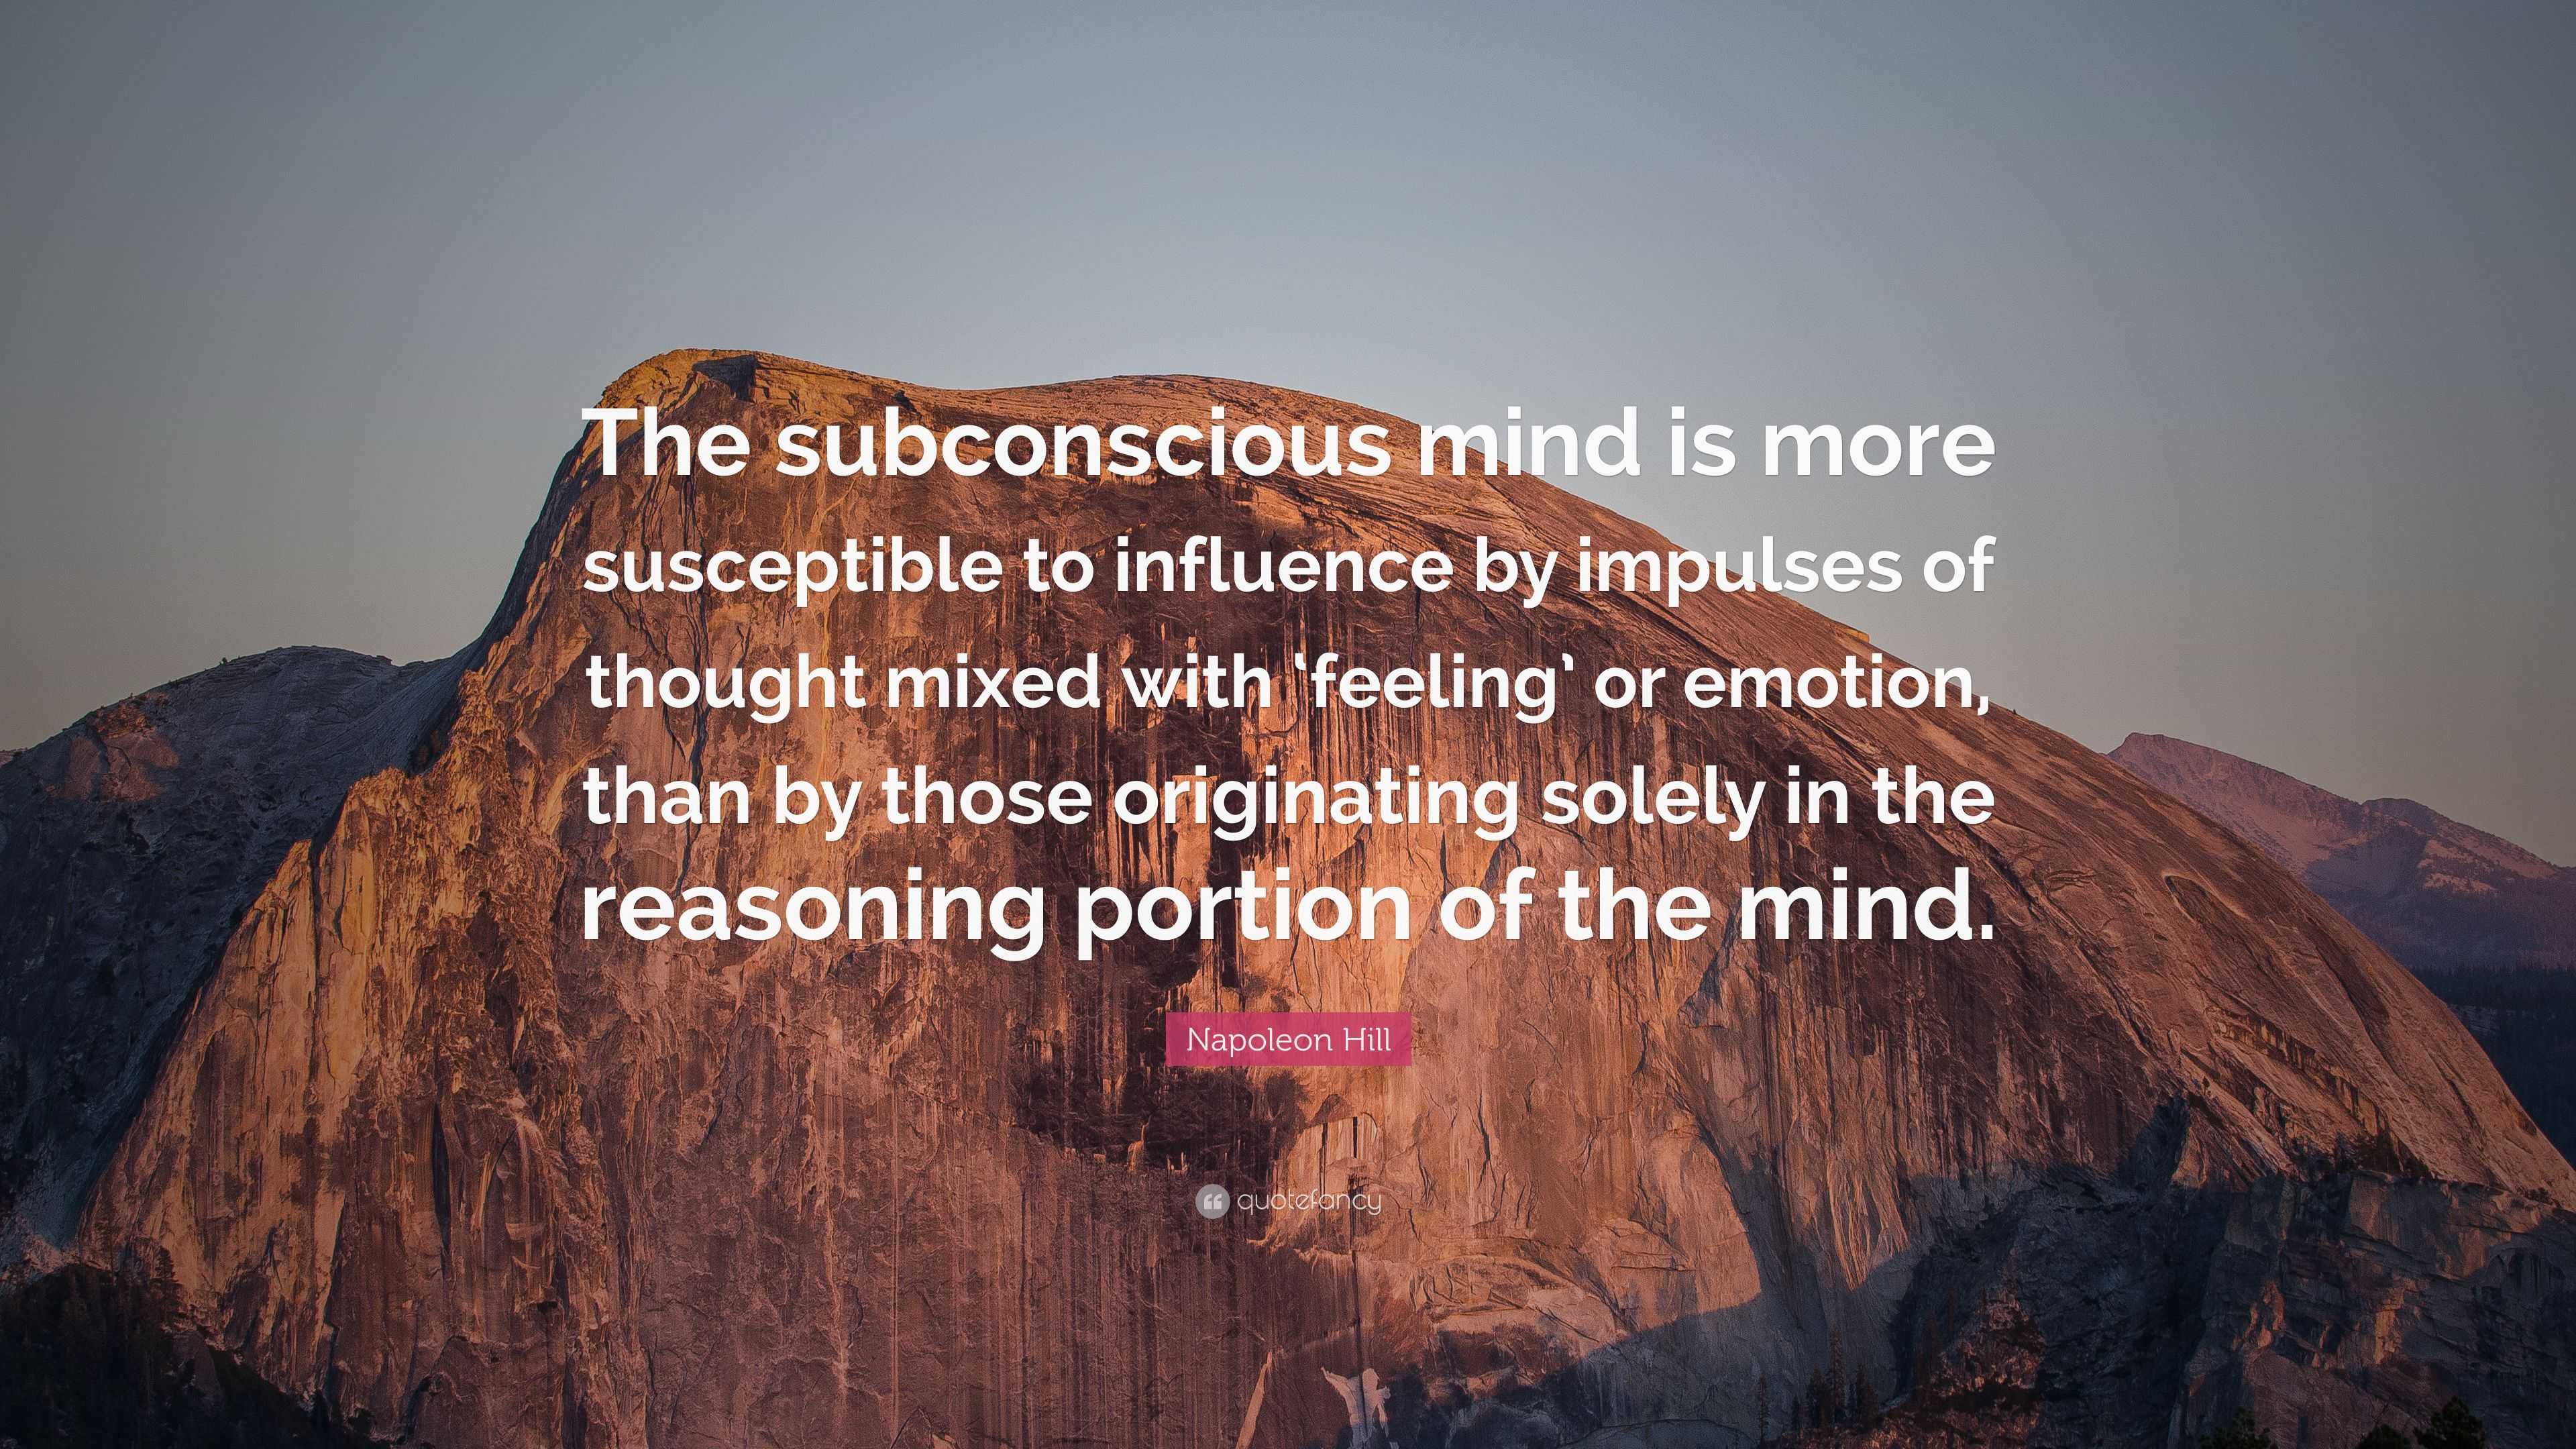 Napoleon Hill Quote: “The subconscious mind is more susceptible to ...